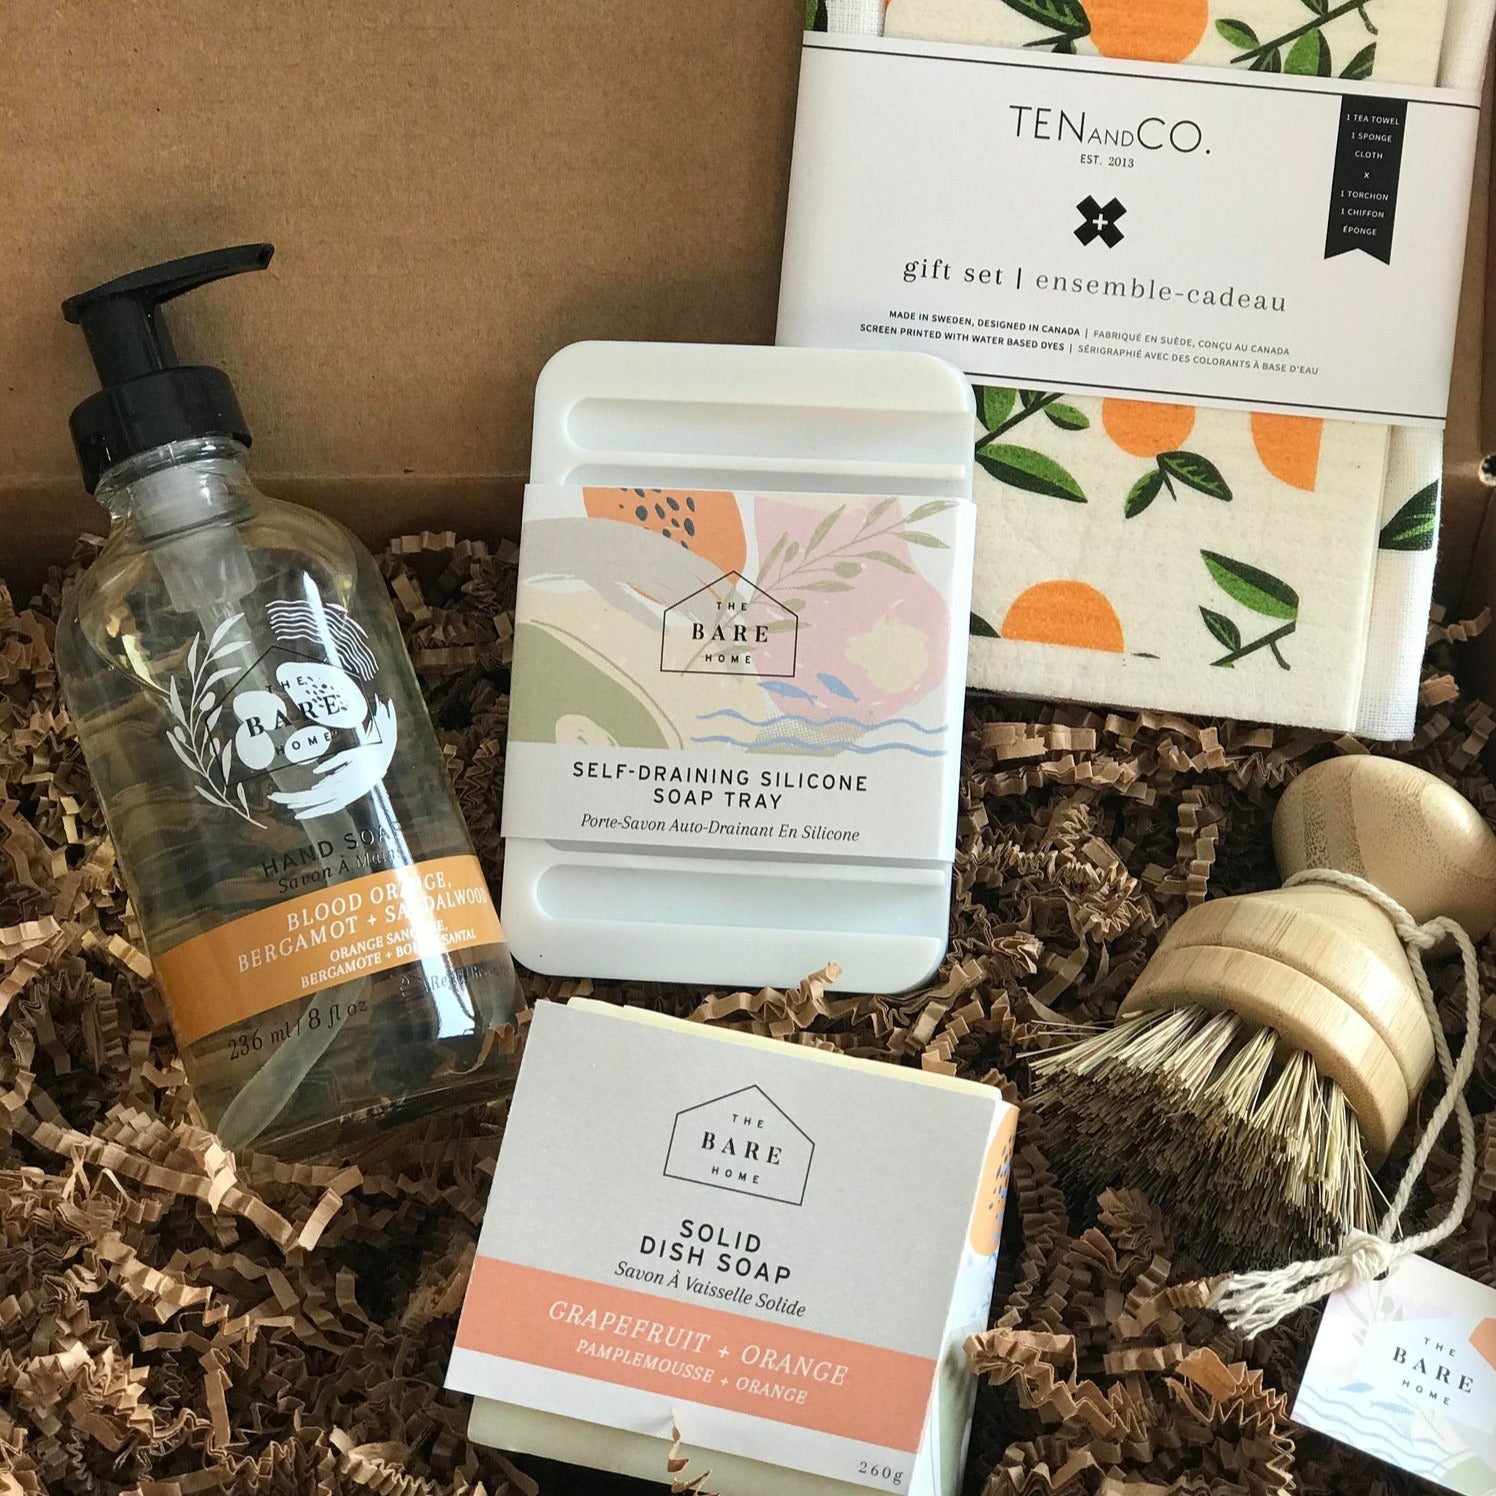 This made in Canada The Bare Home zero waste gift set features a TEN and CO. sponge cloth and tea towel set in a citrus pattern, a refillable 236 ml blood orange, bergamot and sandalwood hand soap in glass bottle, a white silicone soap dish, a grapefruit and orange dish soap bar and a pot scrubber brush